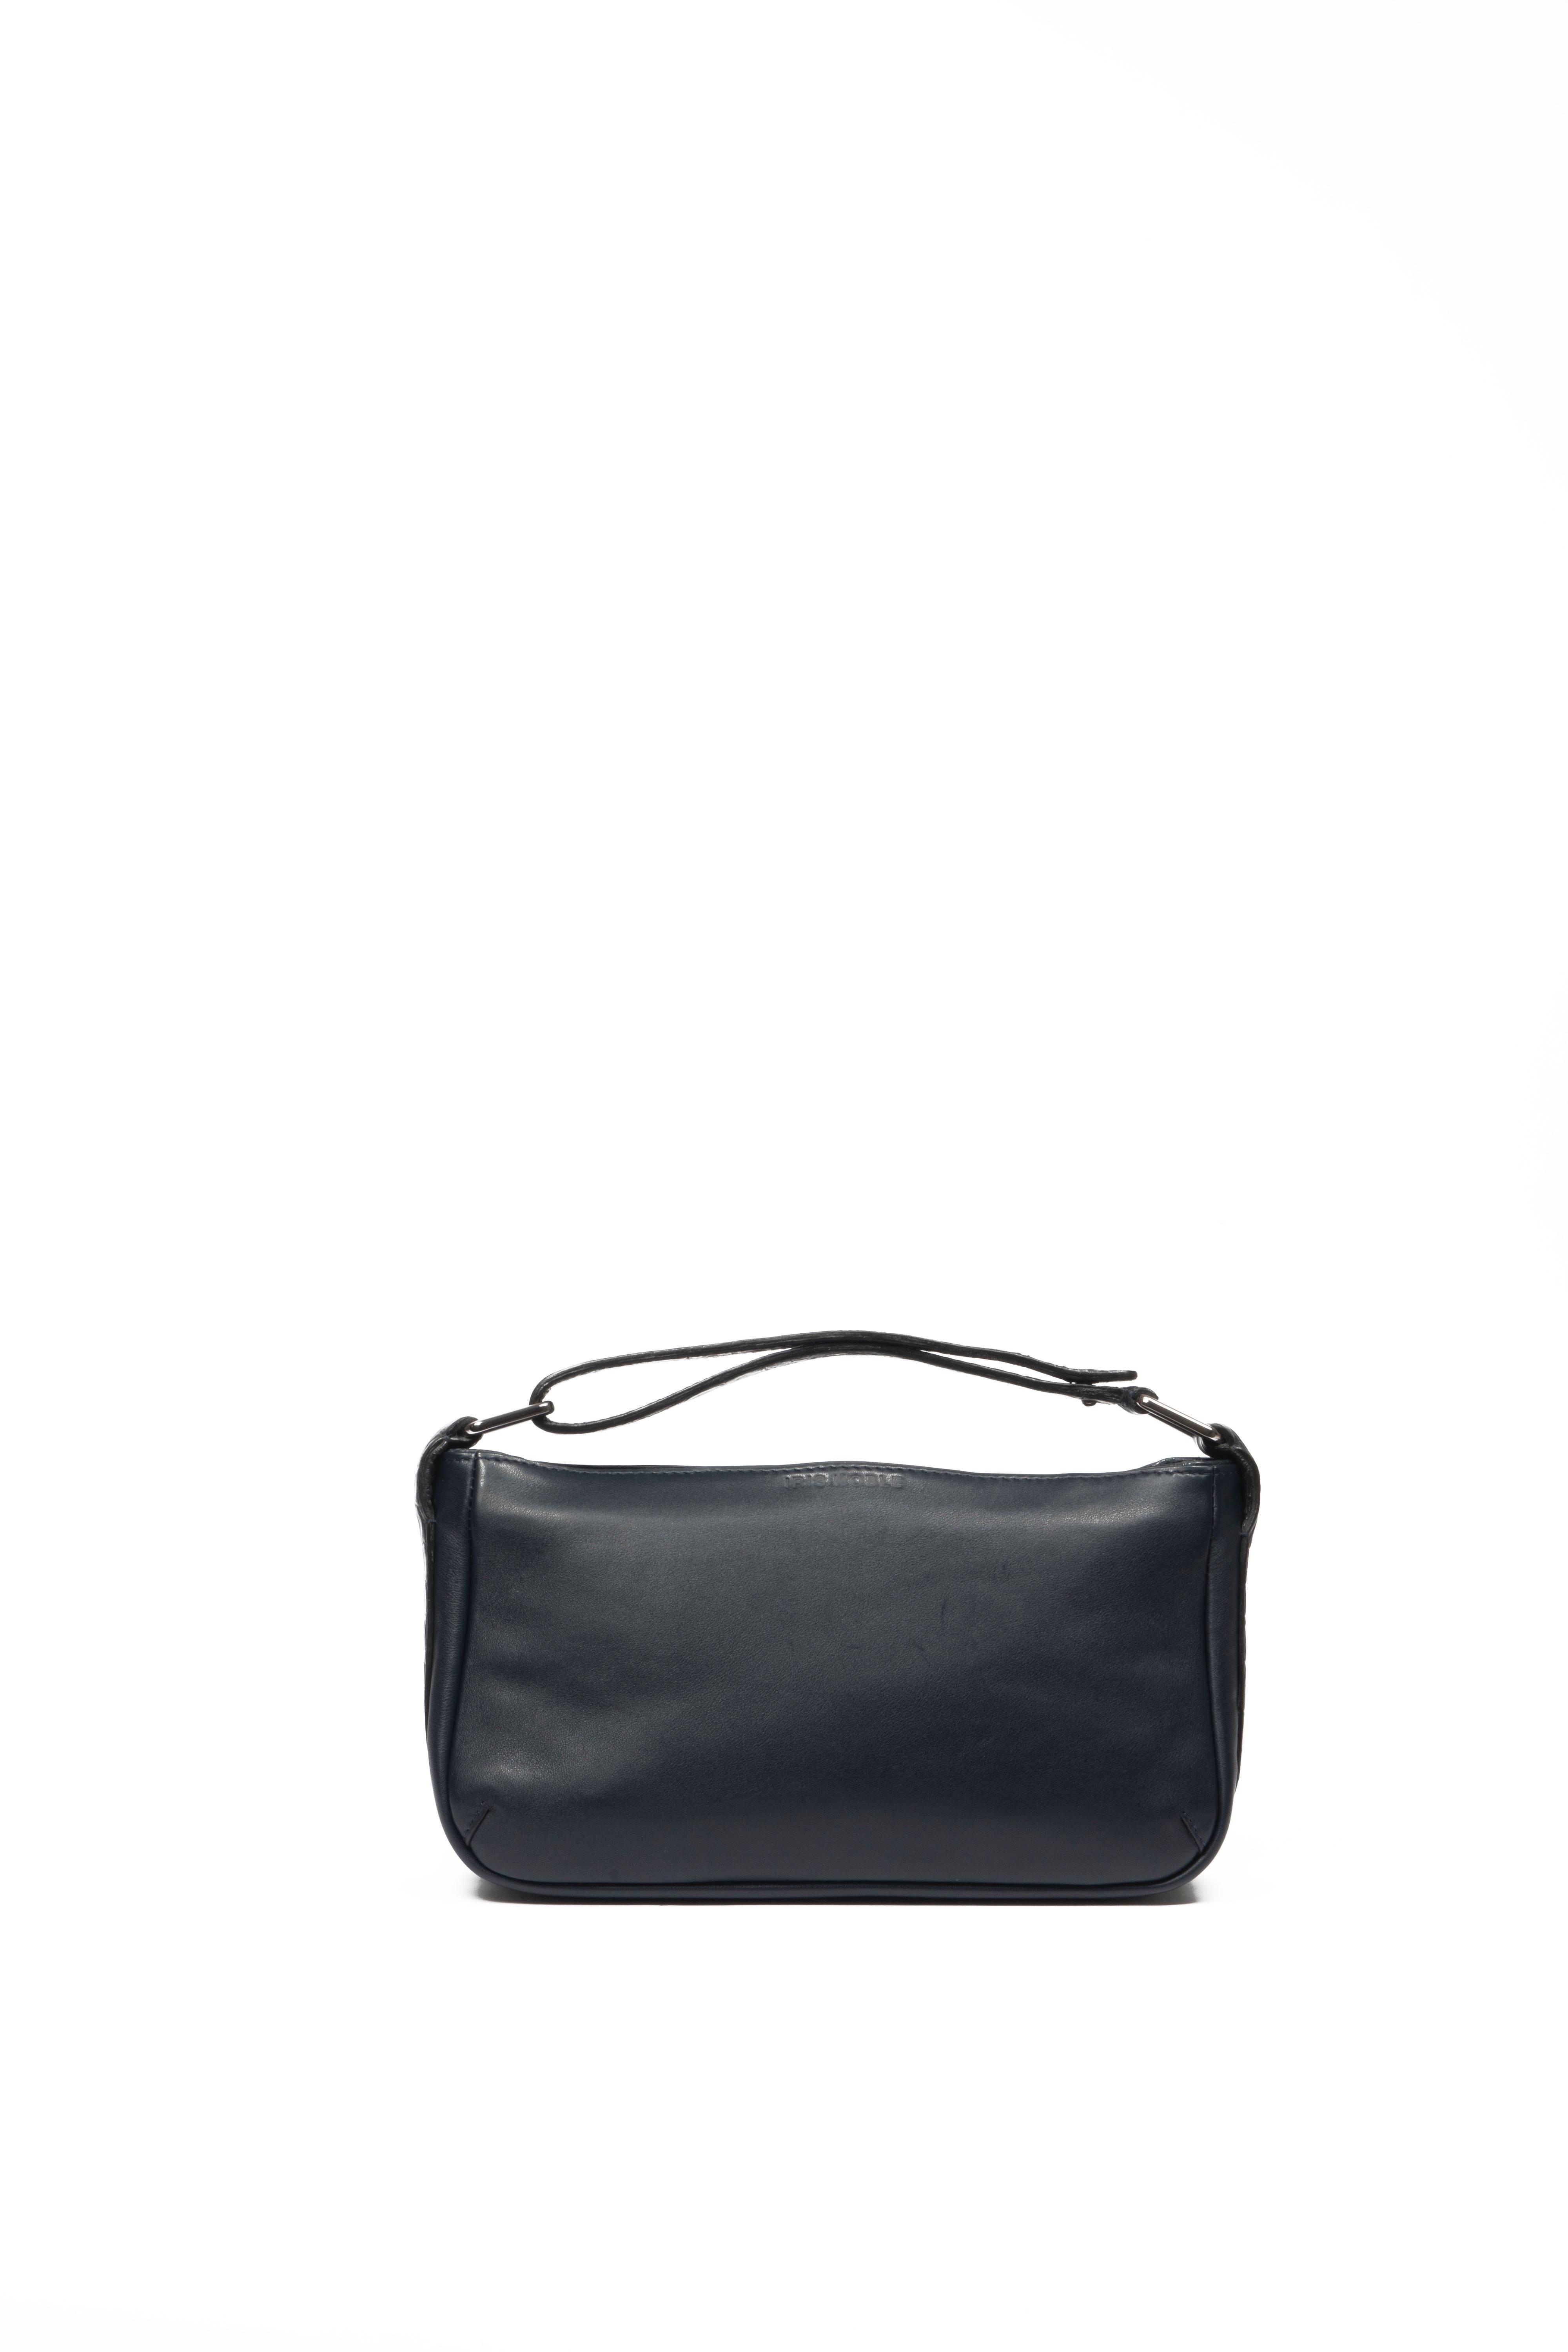 The Lynn baguette was designed by the creator Jennifer Noble and named after her sister “Lynn”. It has been created to allow every woman to carry all her essentials in a business trip or leisure, whether in a New York meeting or in a cocktail party